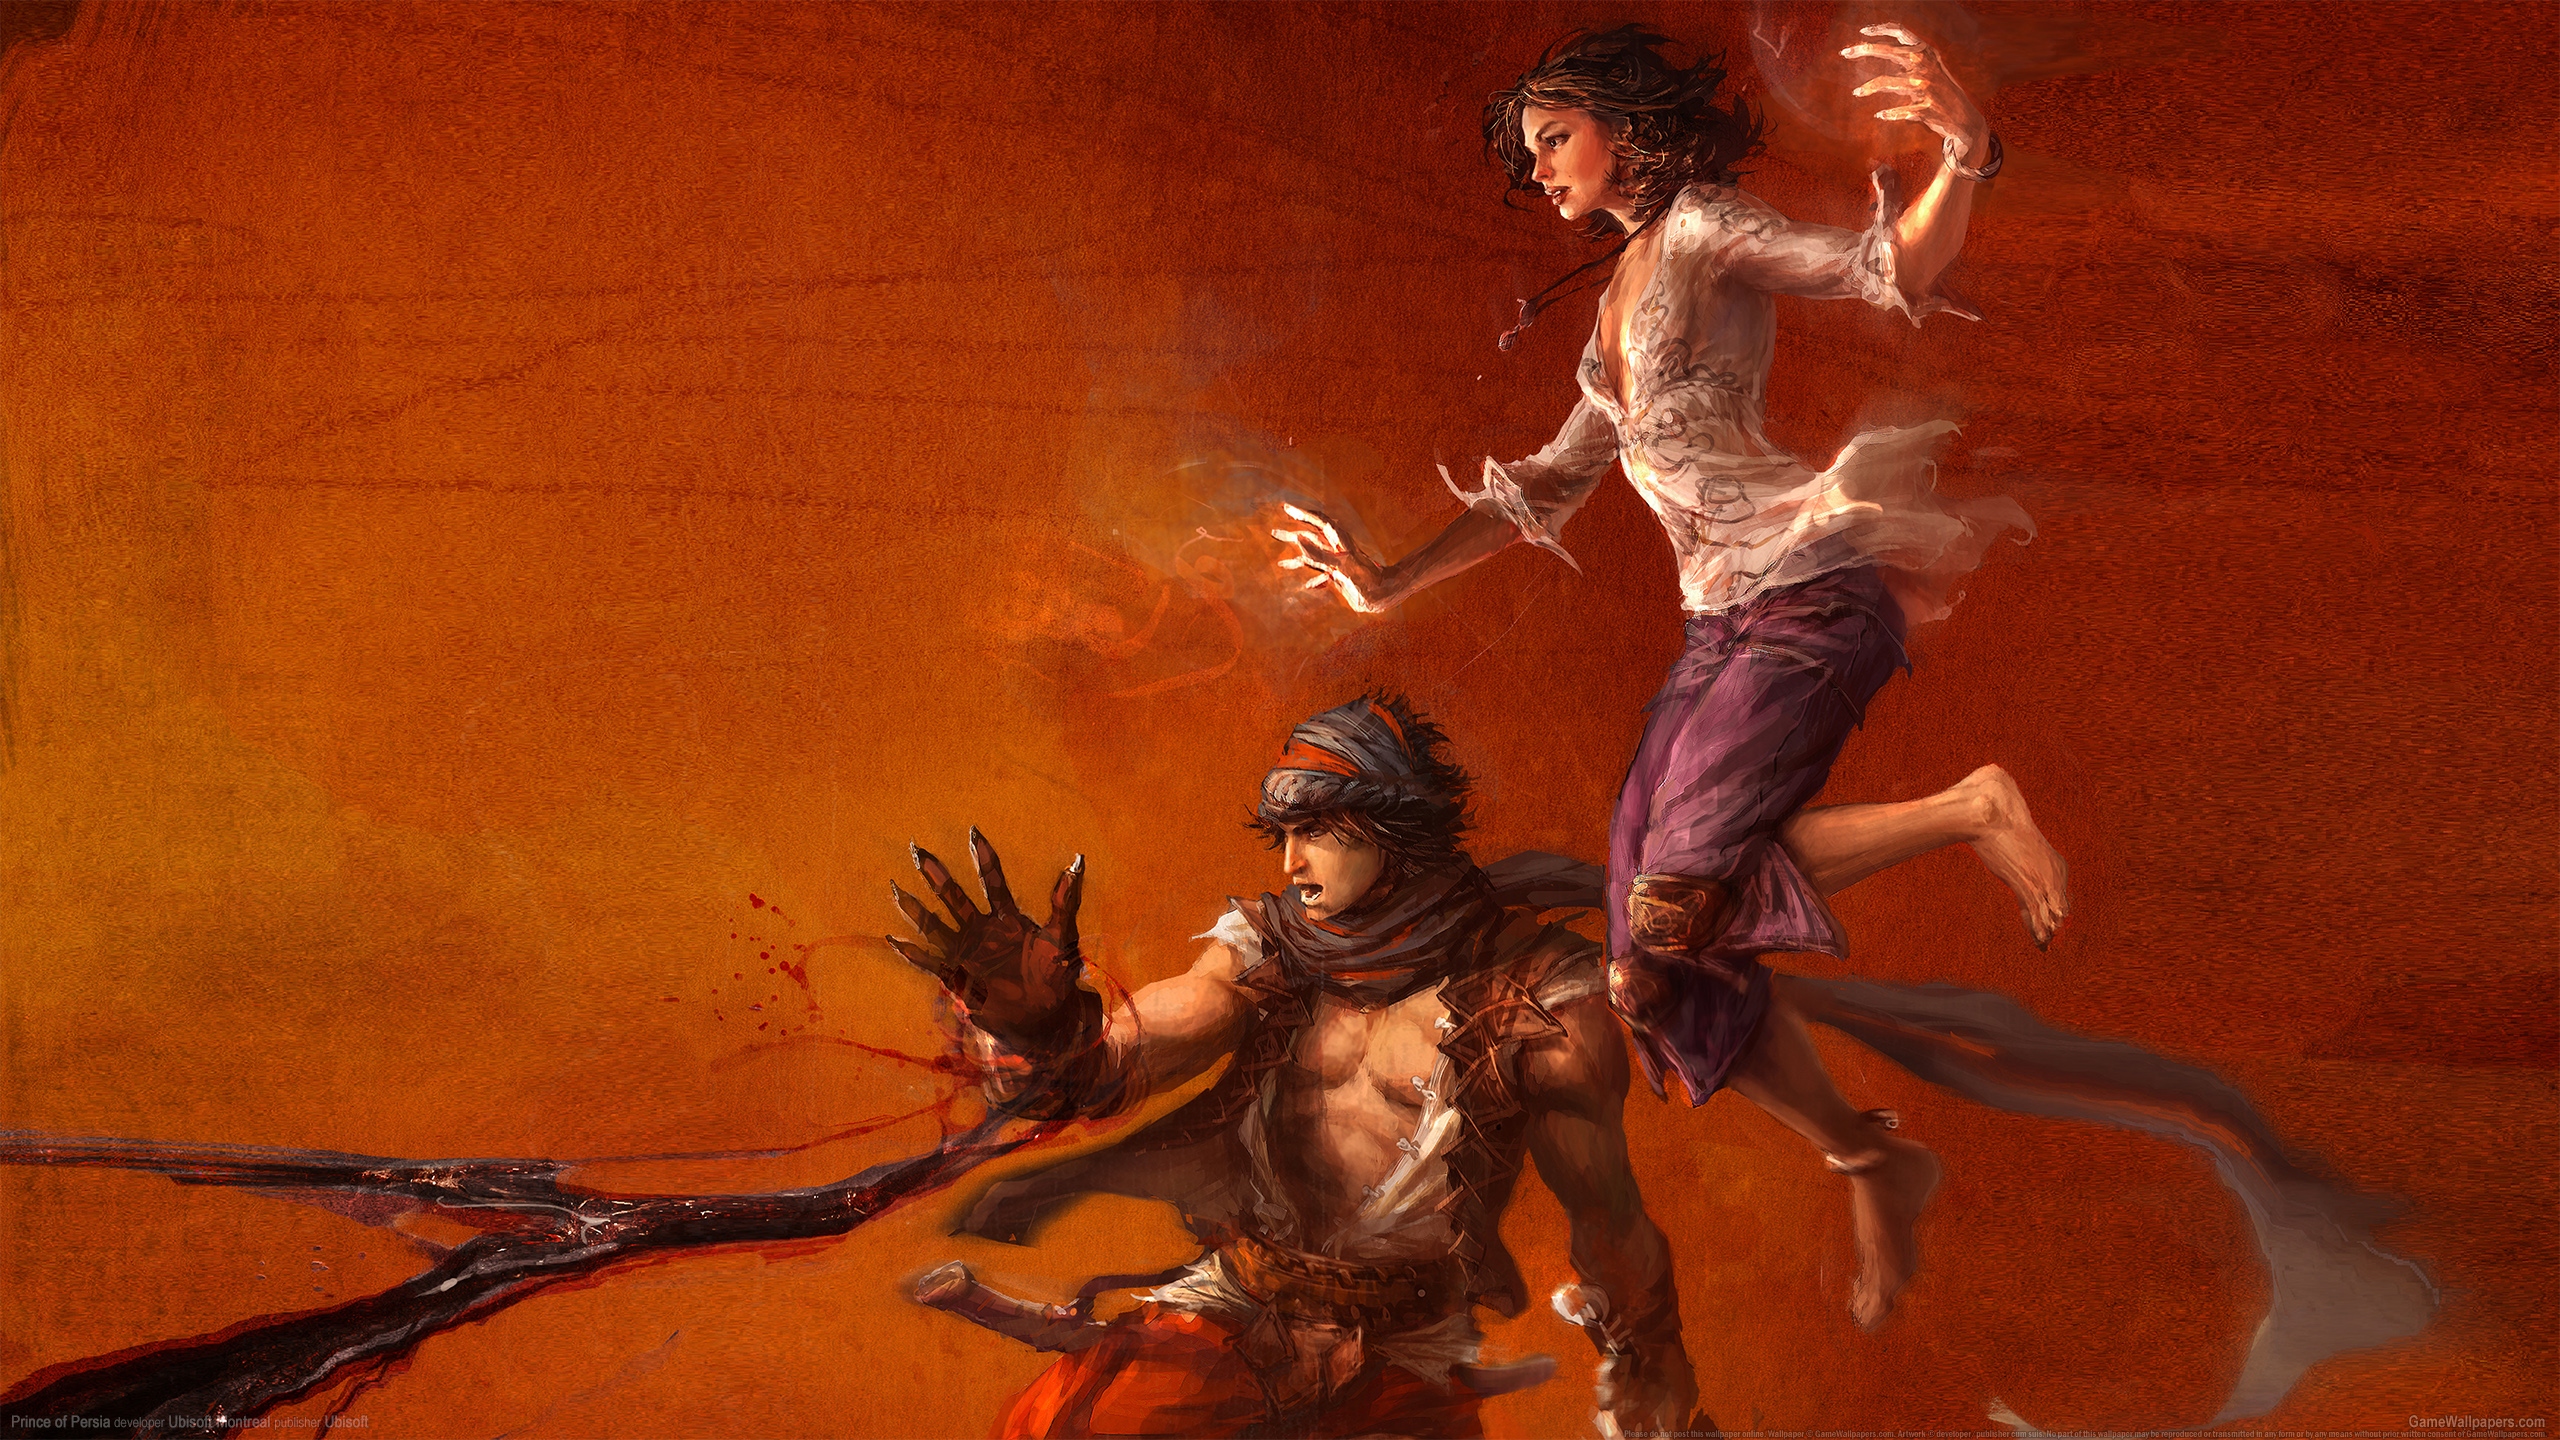 Prince of Persia 2560x1440 wallpaper or background 07